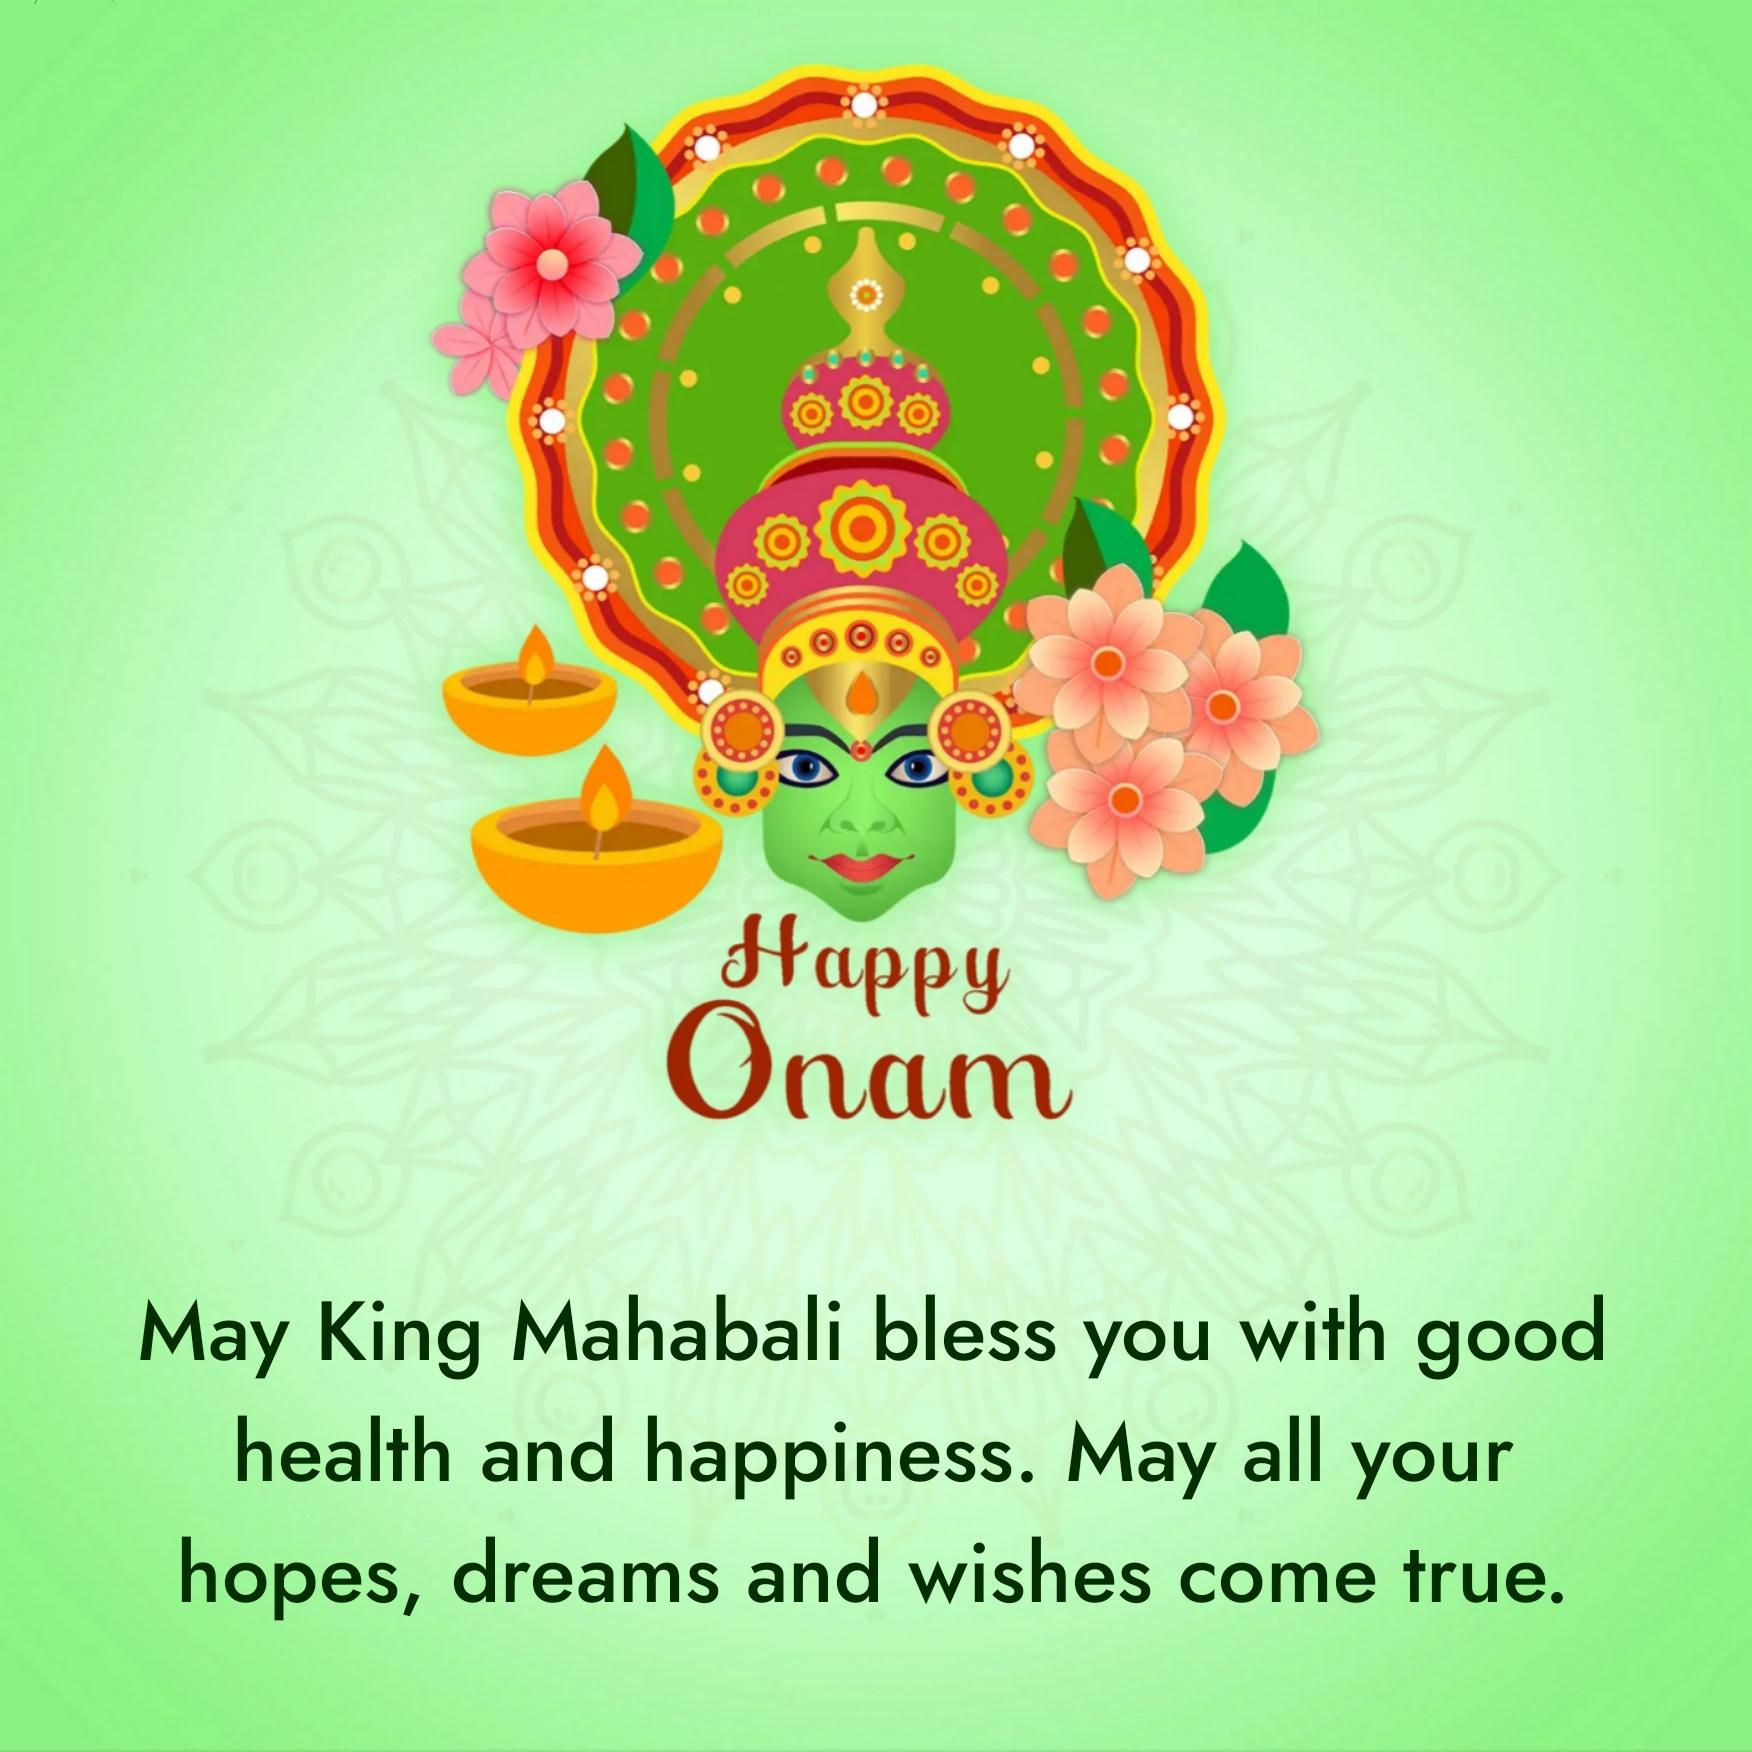 May King Mahabali bless you with good health and happiness